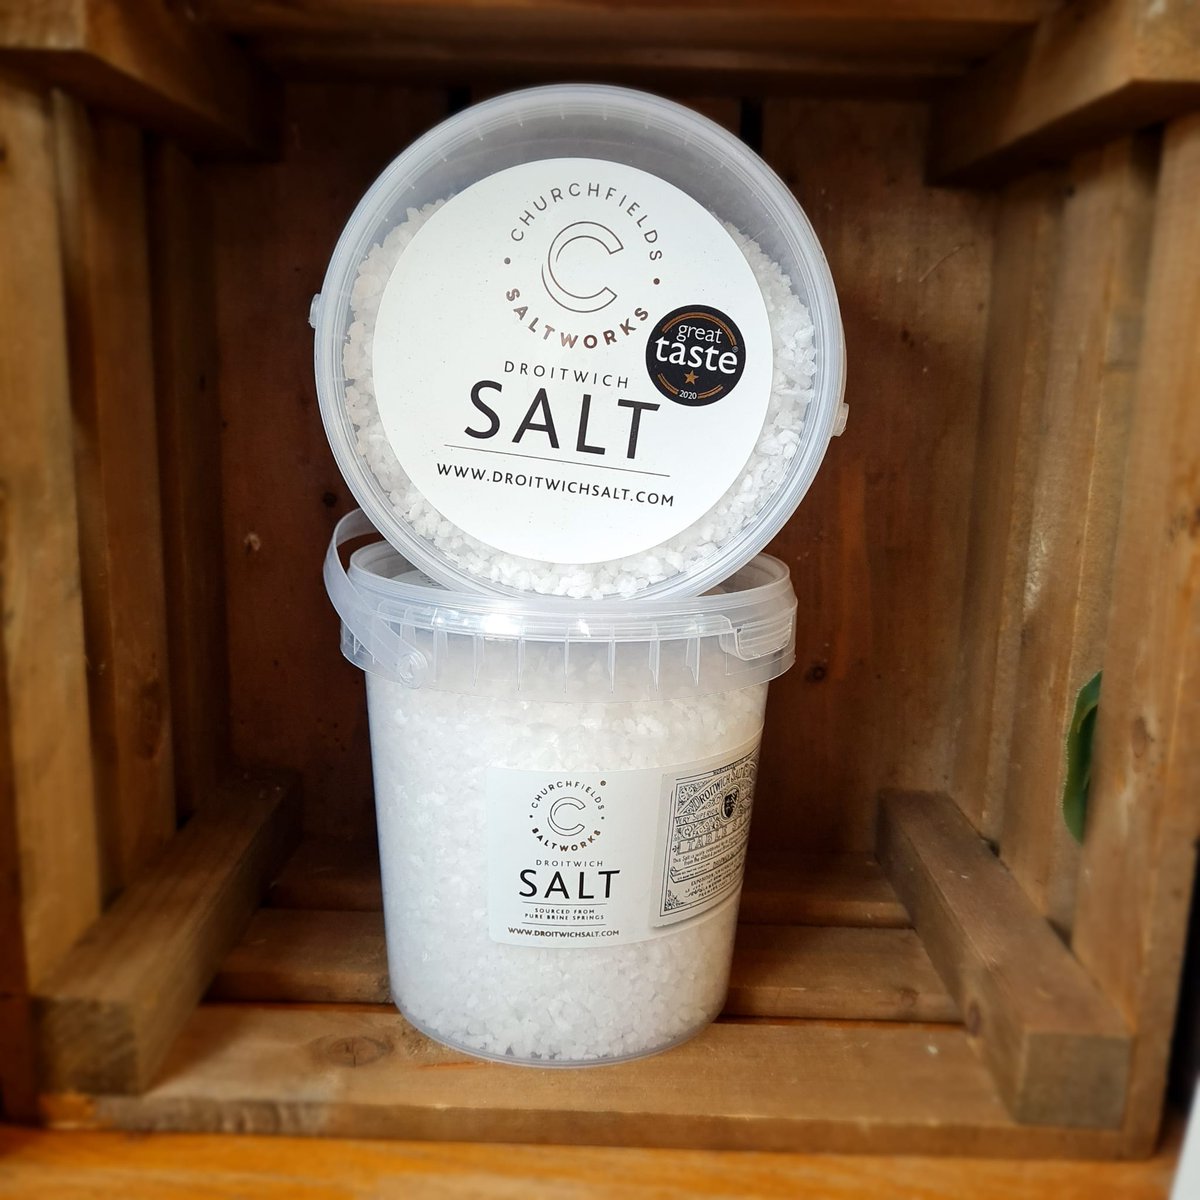 🤔Have you tried award winning Pure Droitwich Salt? It's sourced from one of the oldest and purest brine springs in the world. Tell us what you think! @visitworcestershire @slowfooduk #droitwichsalt #salt #naturalingredients #seasoning #ukfoodie #tastemaker #allnatural